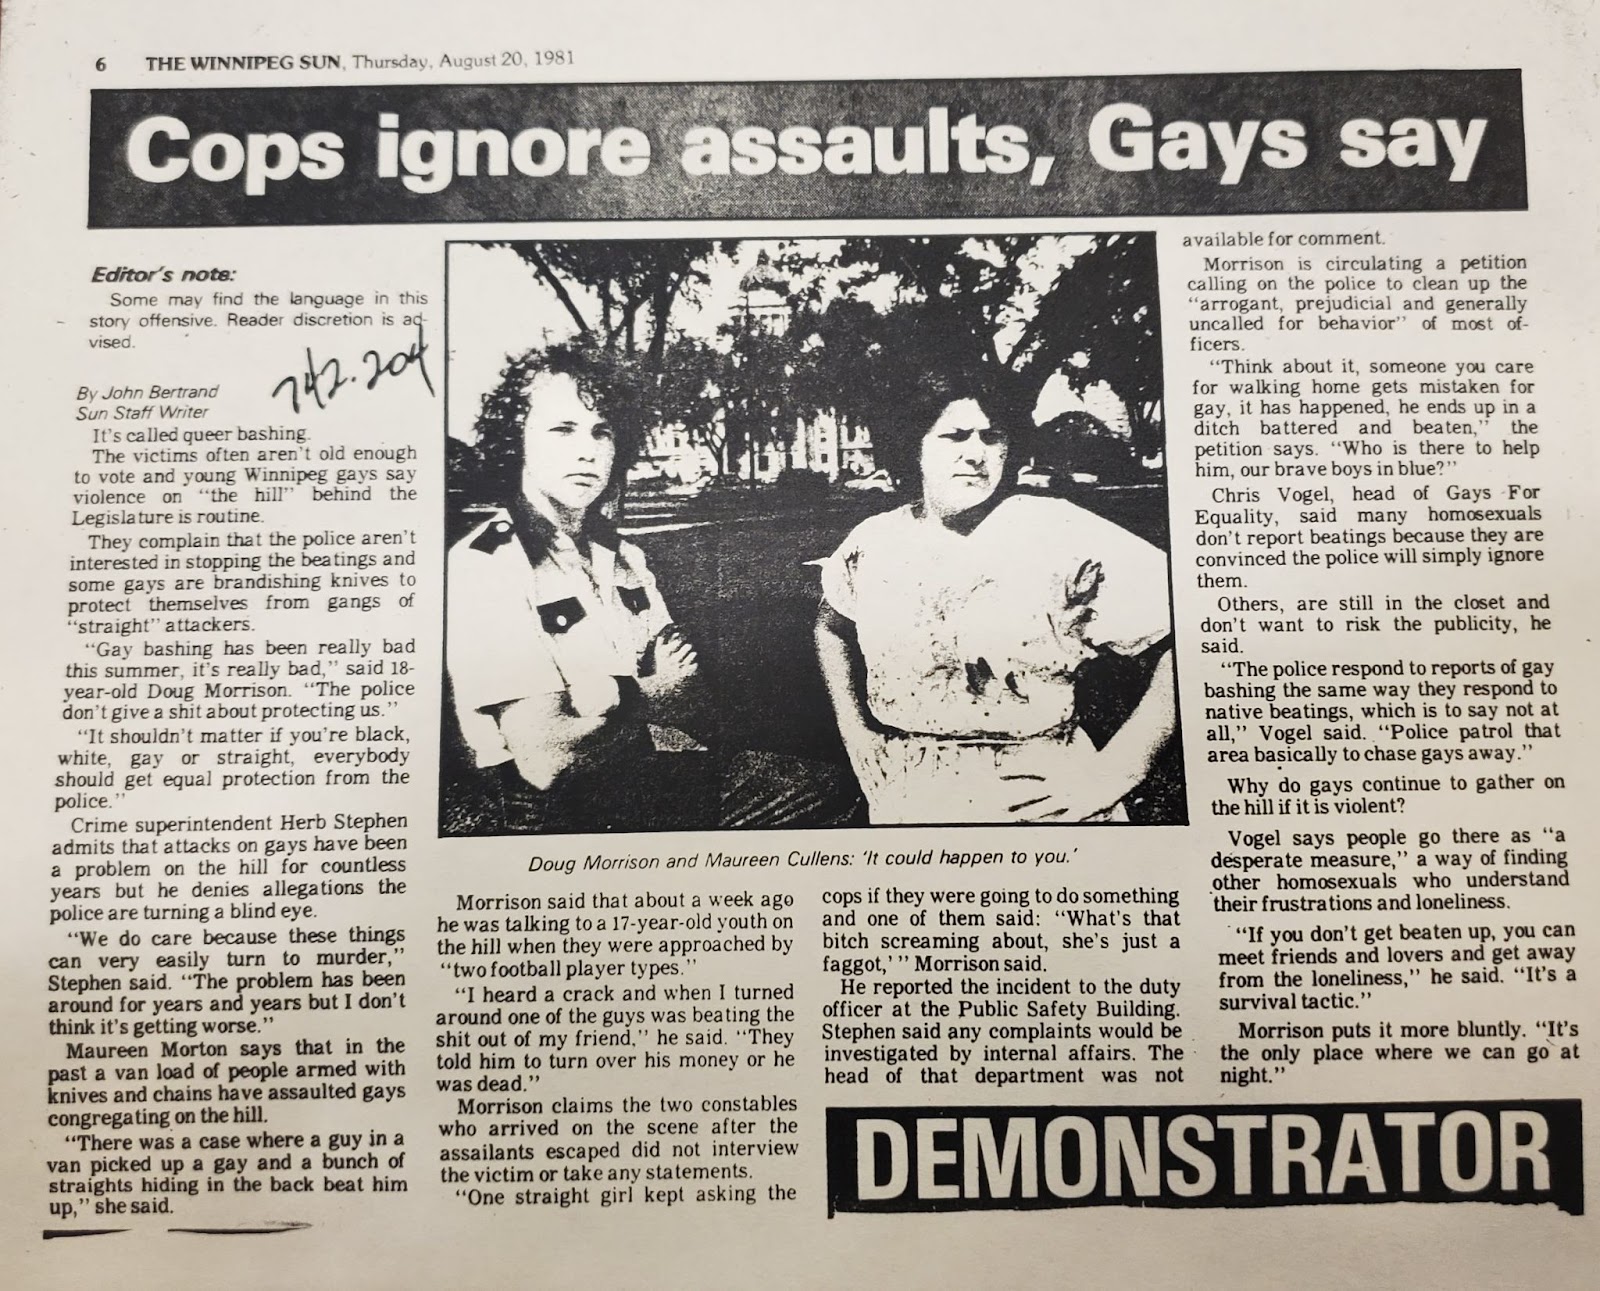 The Winnipeg Sun newspaper article dated August 20, 1981, with a title that heads “Cops ignore assaults, gays say.”